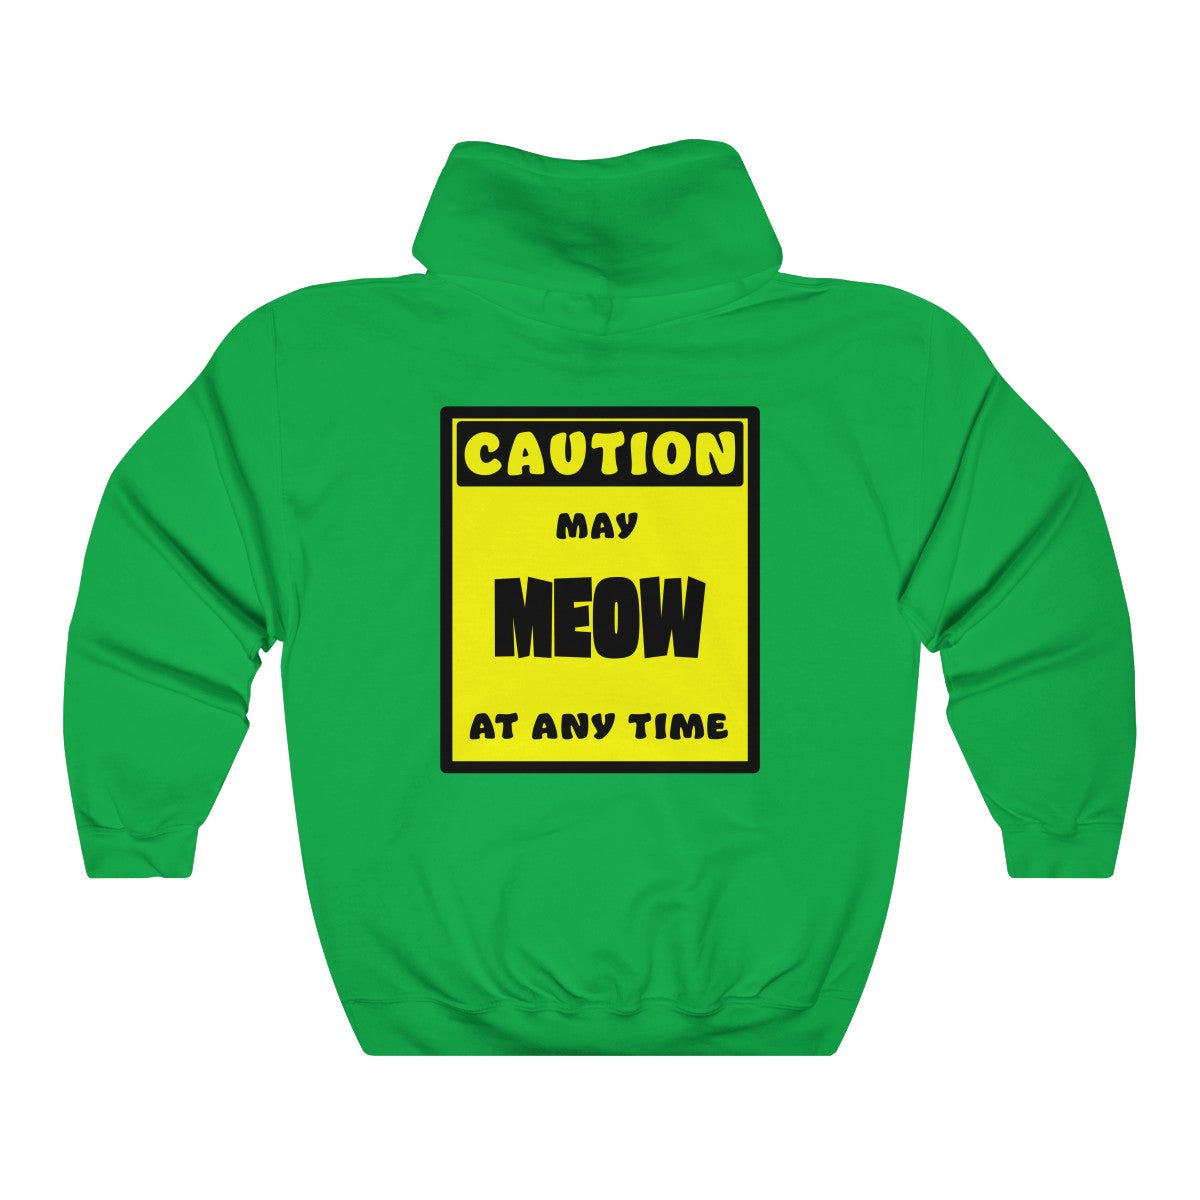 CAUTION! May MEOW at any time! - Hoodie Hoodie AFLT-Whootorca Green S 